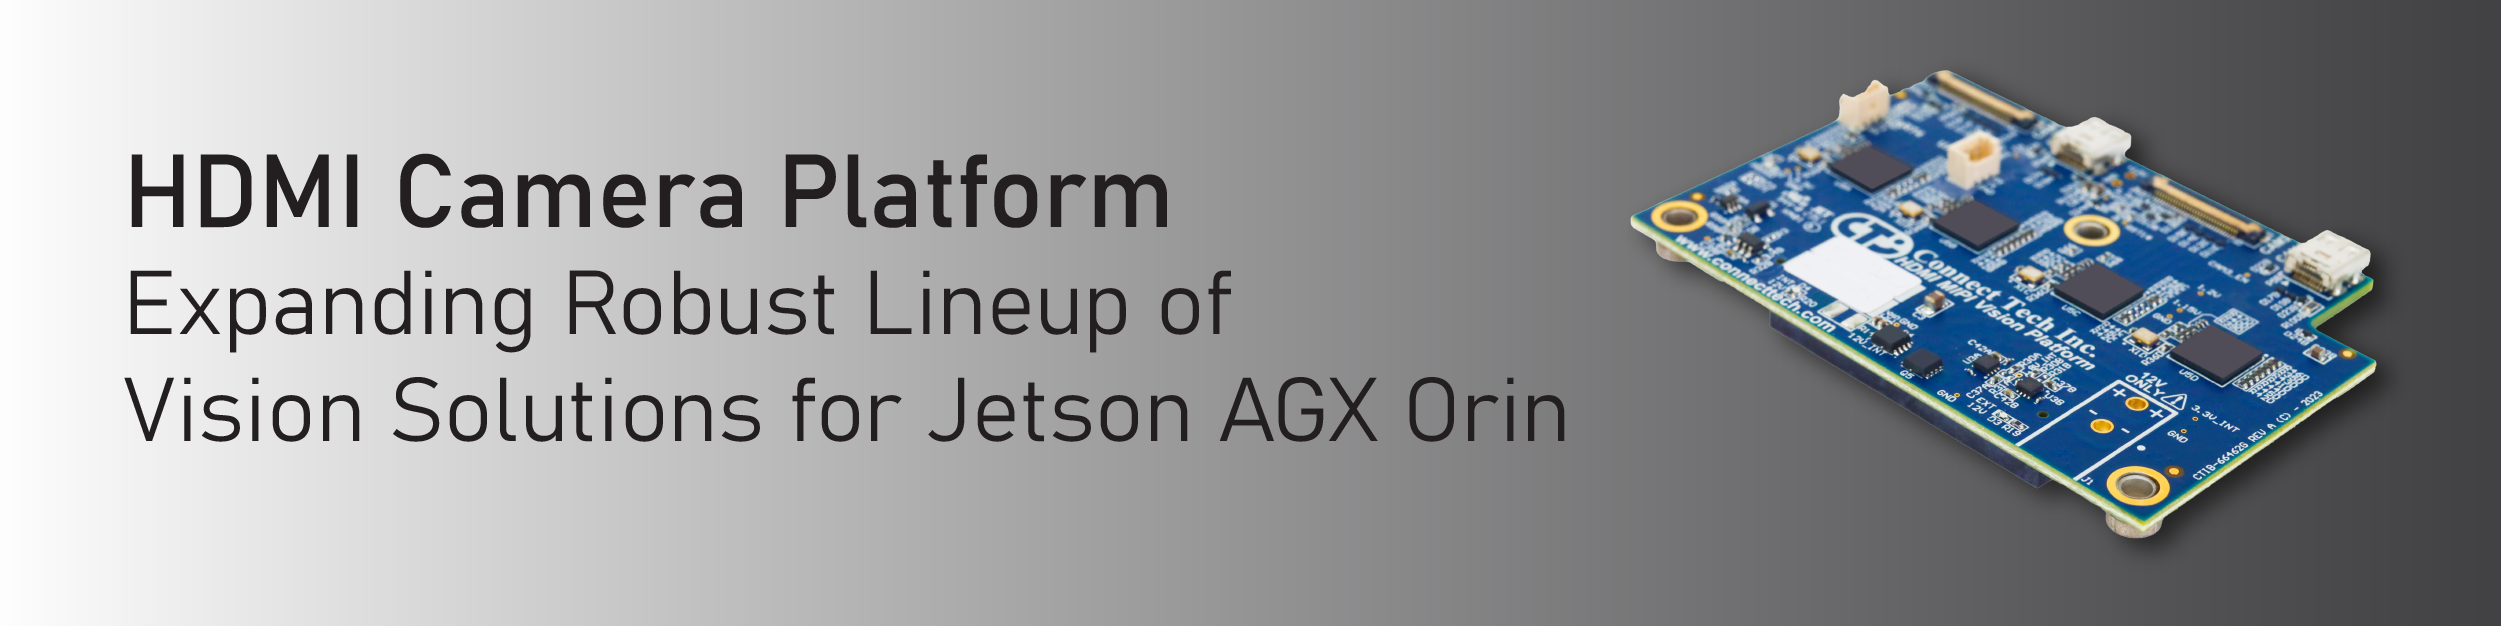 HDMI Camera Platform - Expanding Robust Lieup of Vision Solutions for Jetson AGX Orin